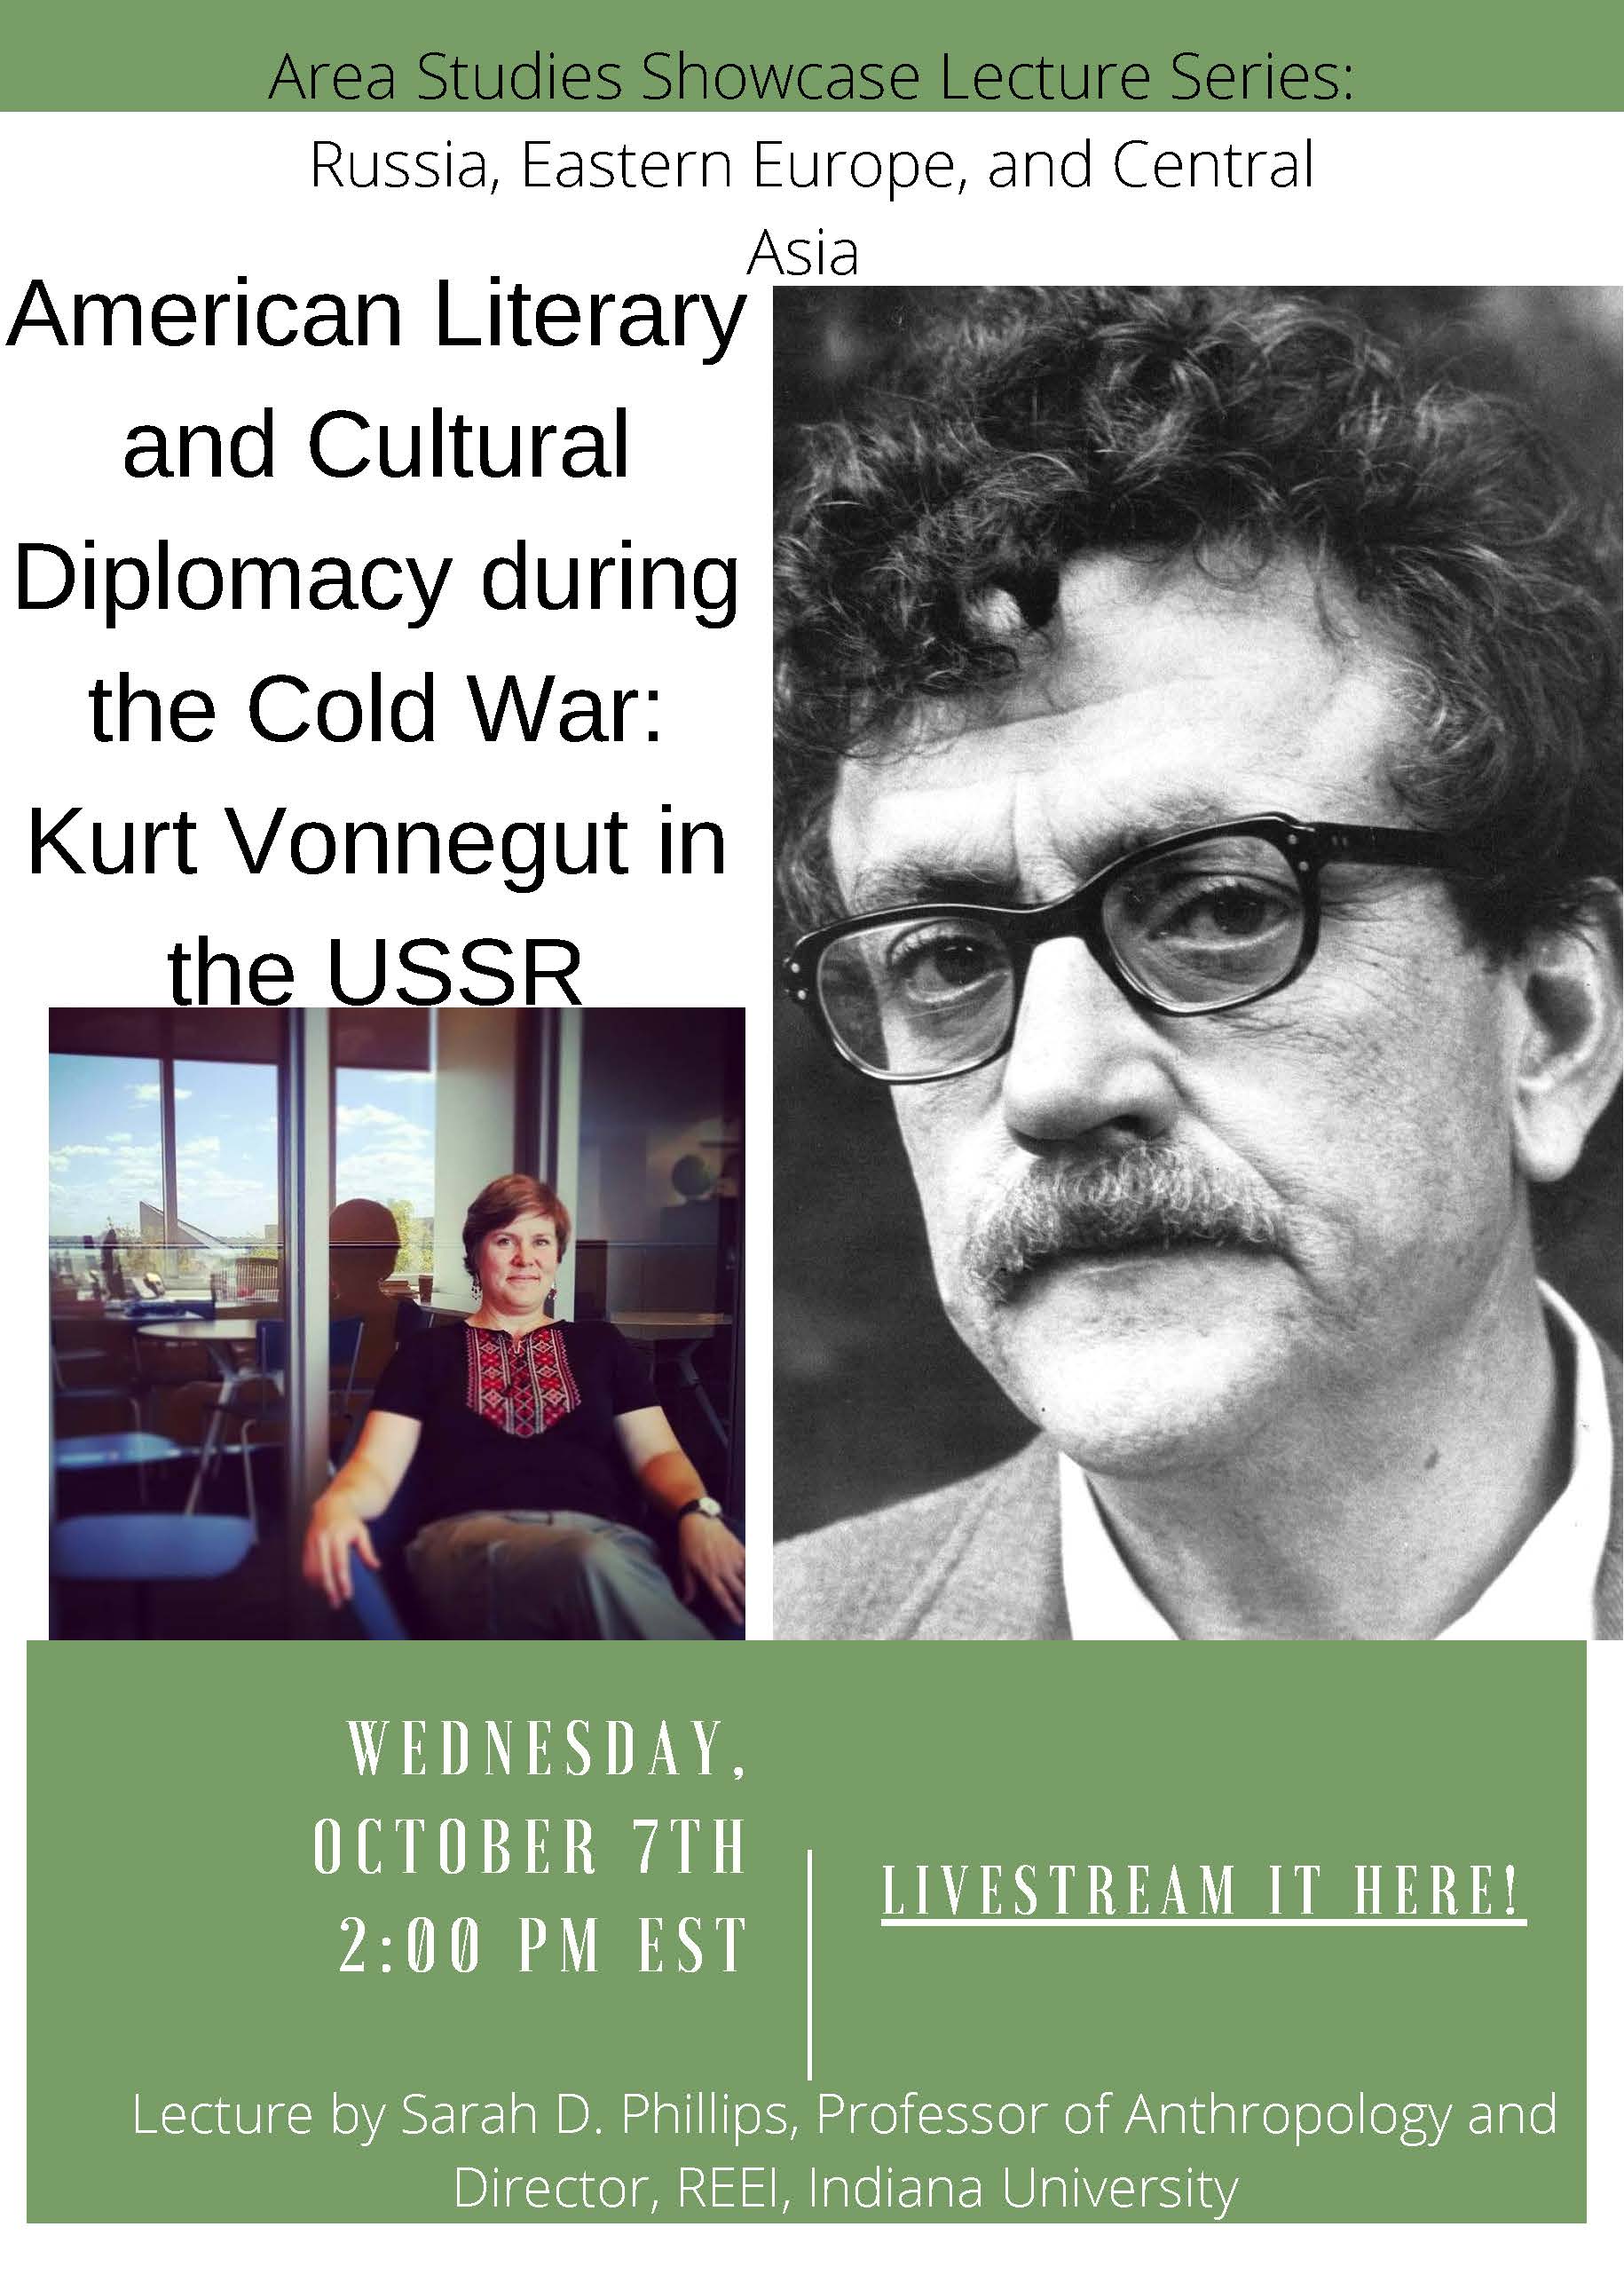 American-Literary-and-Cultural-Diplomacy-during-the-Cold-War_-Kurt-Vonnegut-in-the-USSR-09.21.2020-V3.jpg